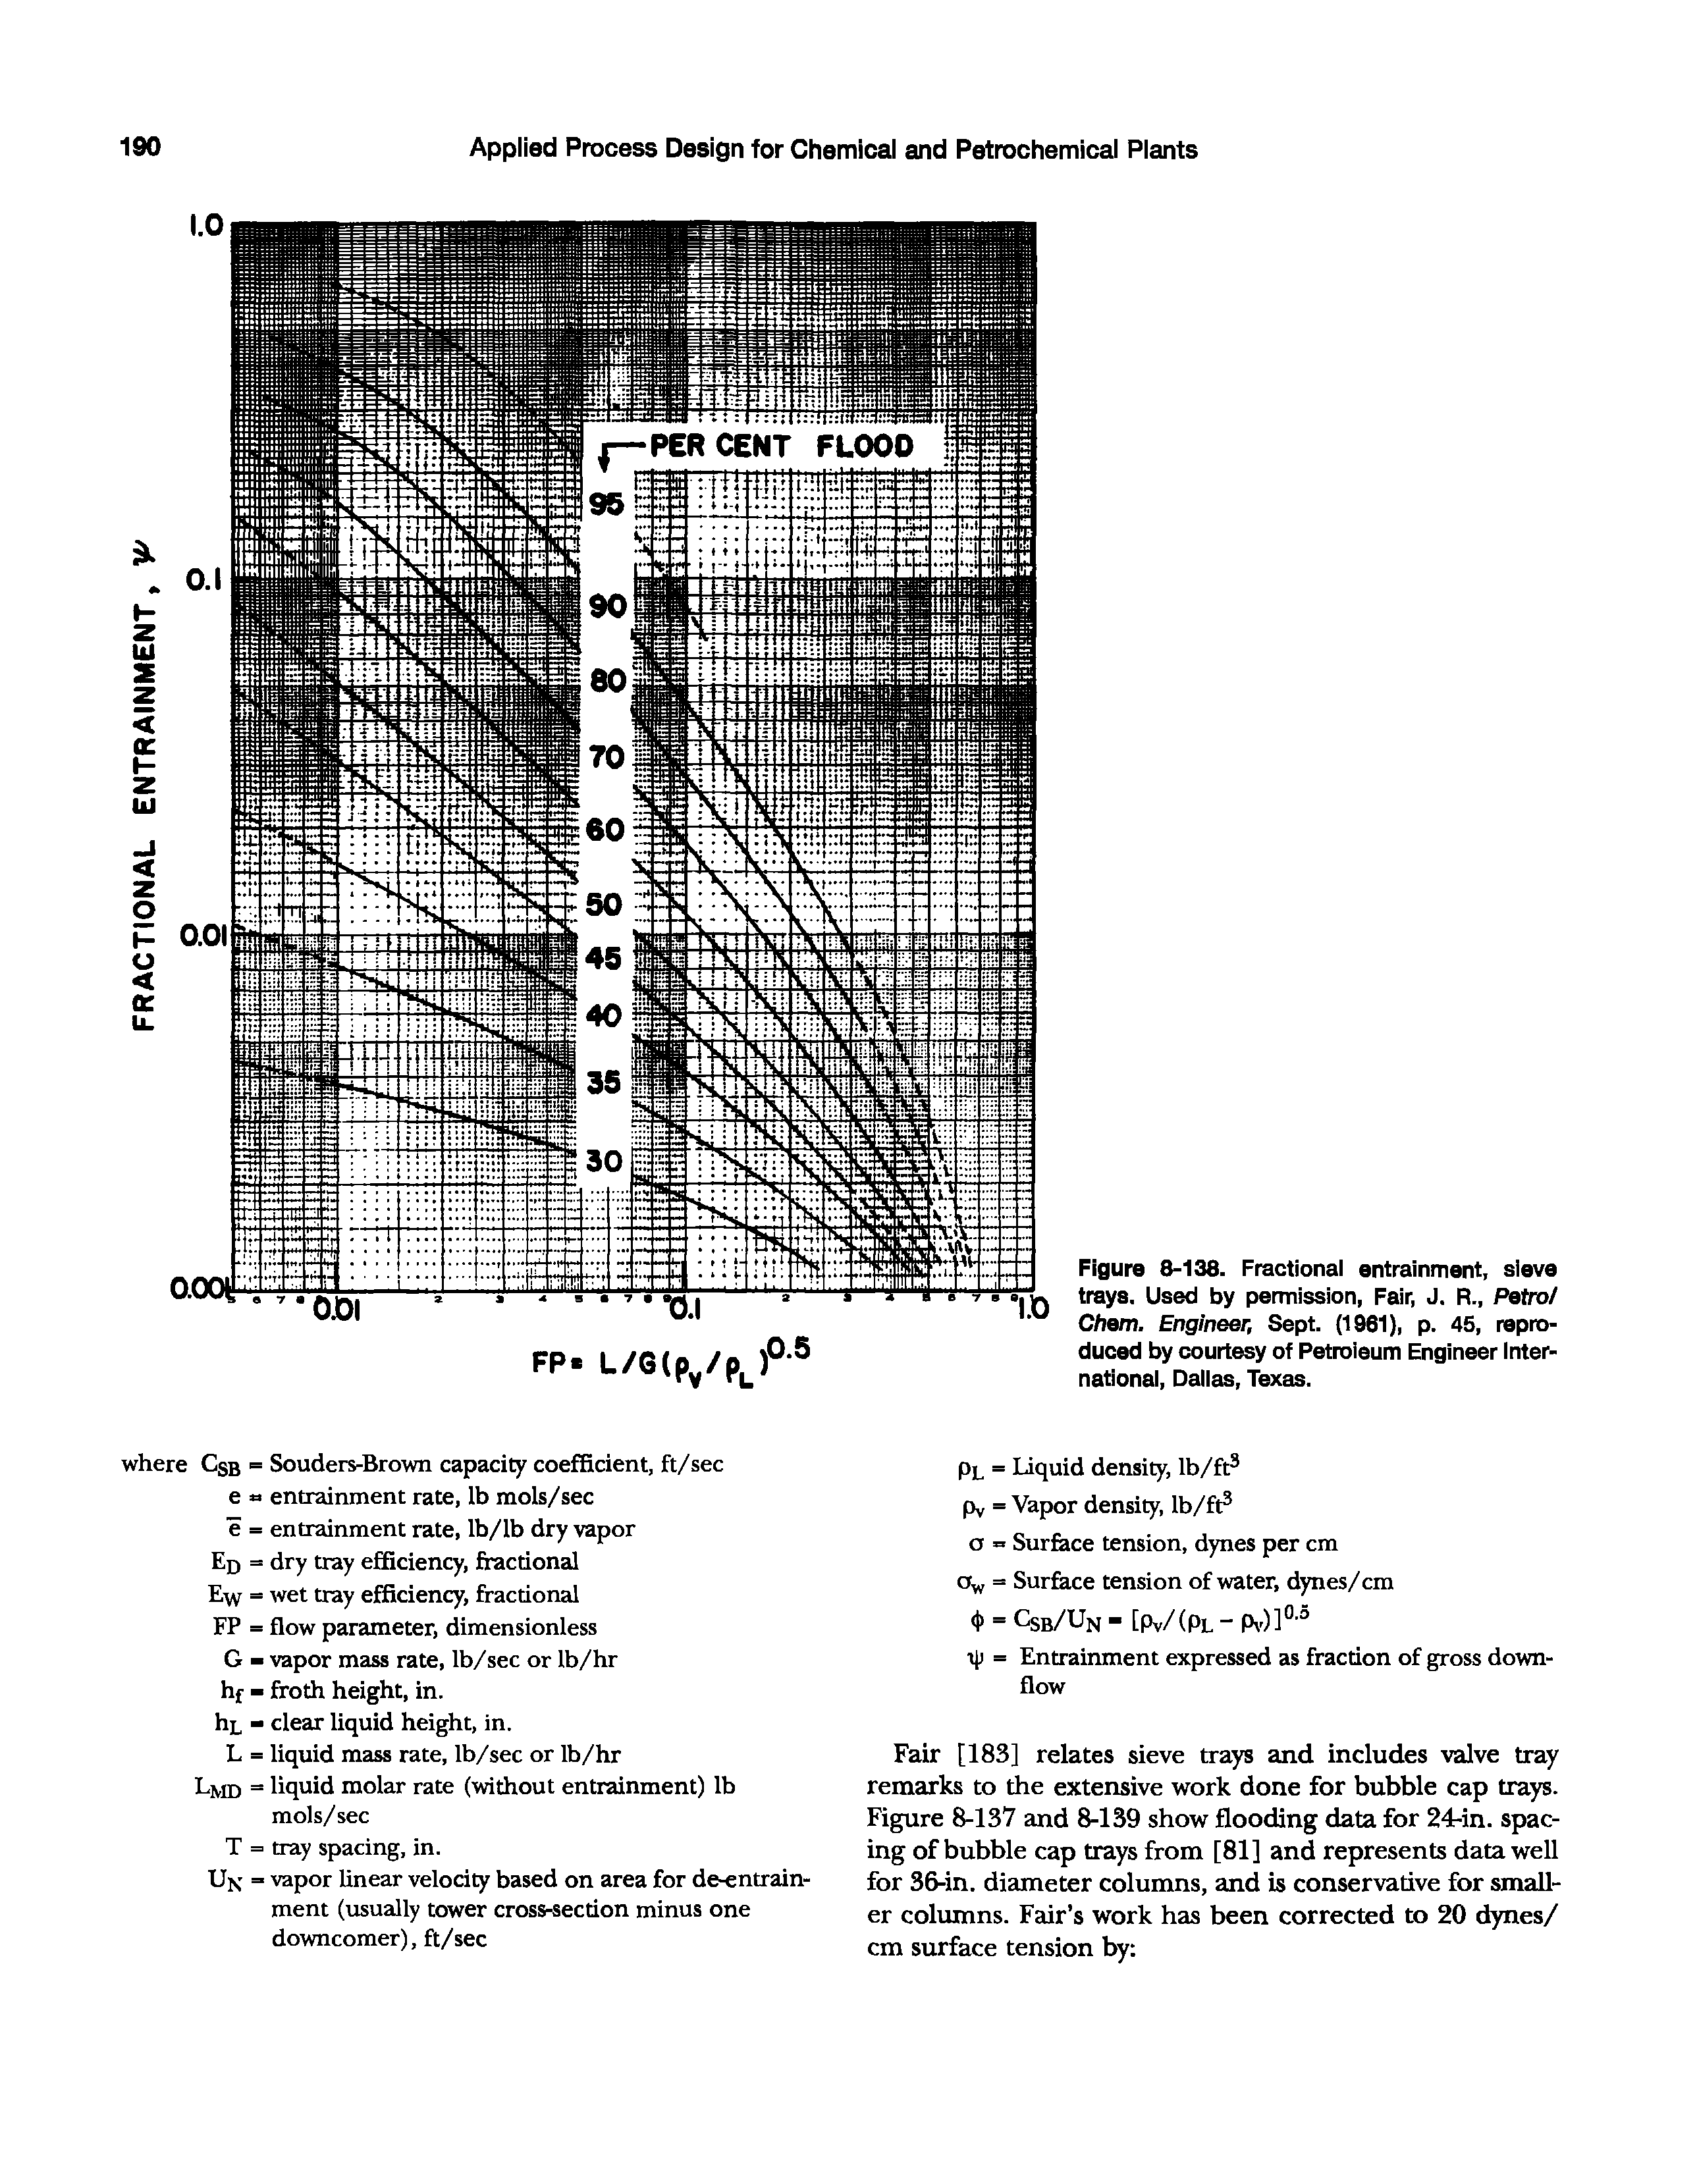 Figure 8-138. Fractional entrainment, sieve 1 trays. Used by permission, Fair, J. R., Petro/ Chem. Engineer, Sept. (1961), p. 45, reproduced by courtesy of Petroieum Engineer International, Dallas, Texas.